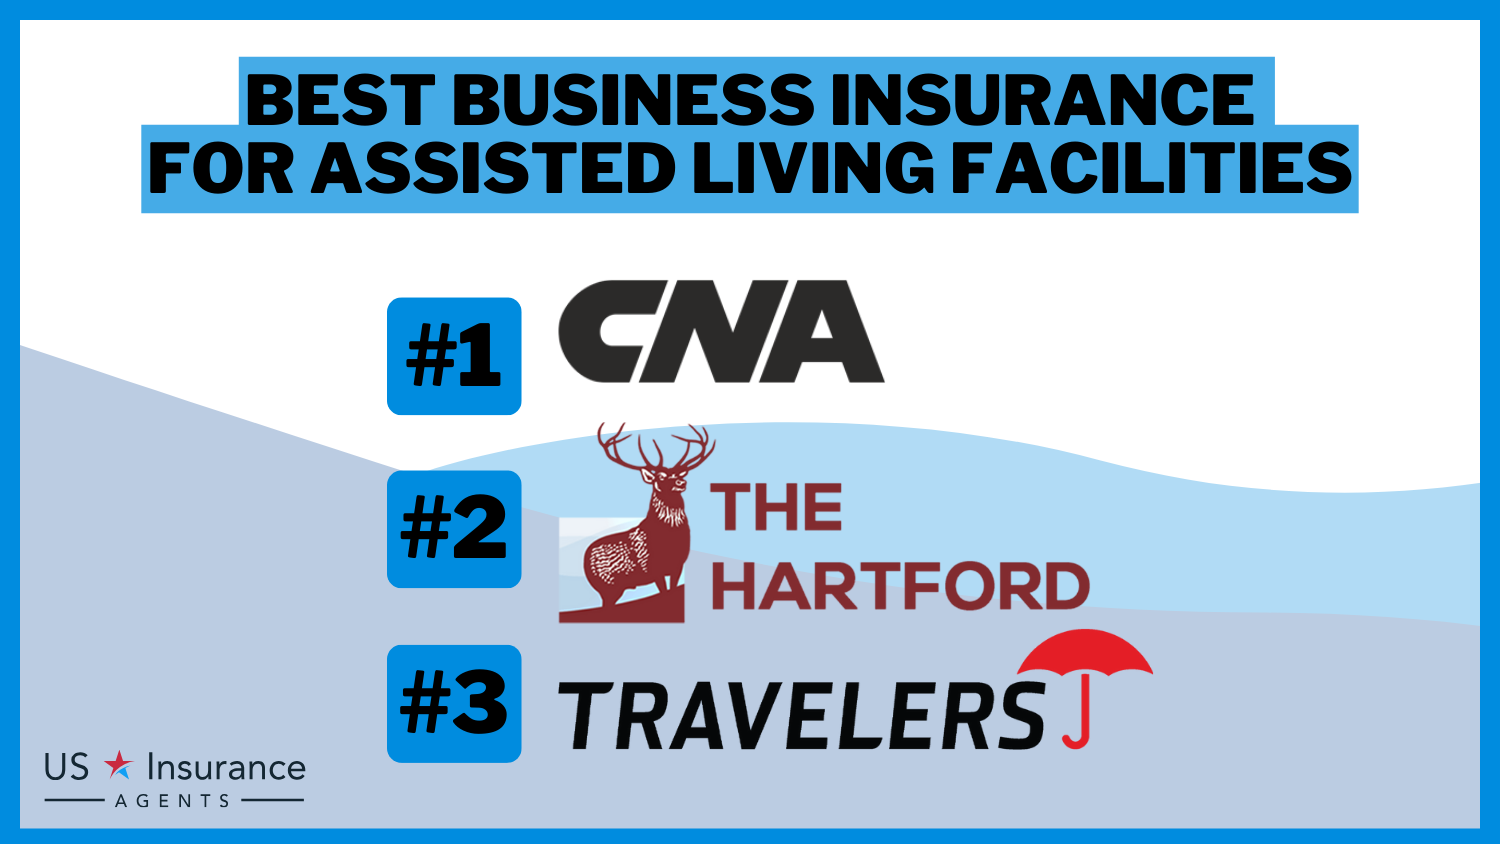 CNA, The Hartford and Travelers: Best Business Insurance for Assisted Living Facilities